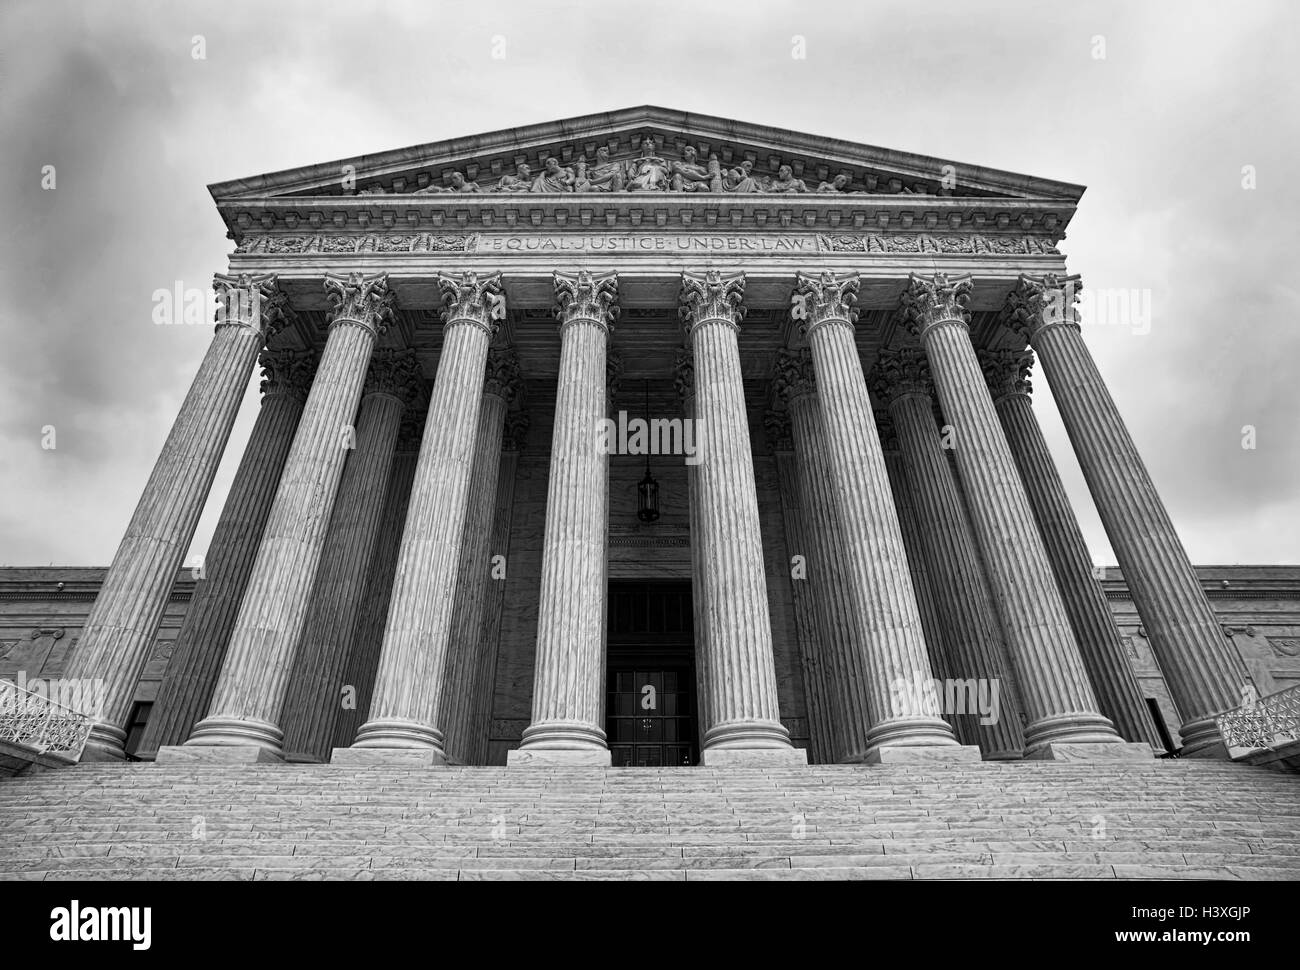 The Supreme Court building in Washington DC. in black and white. Stock Photo